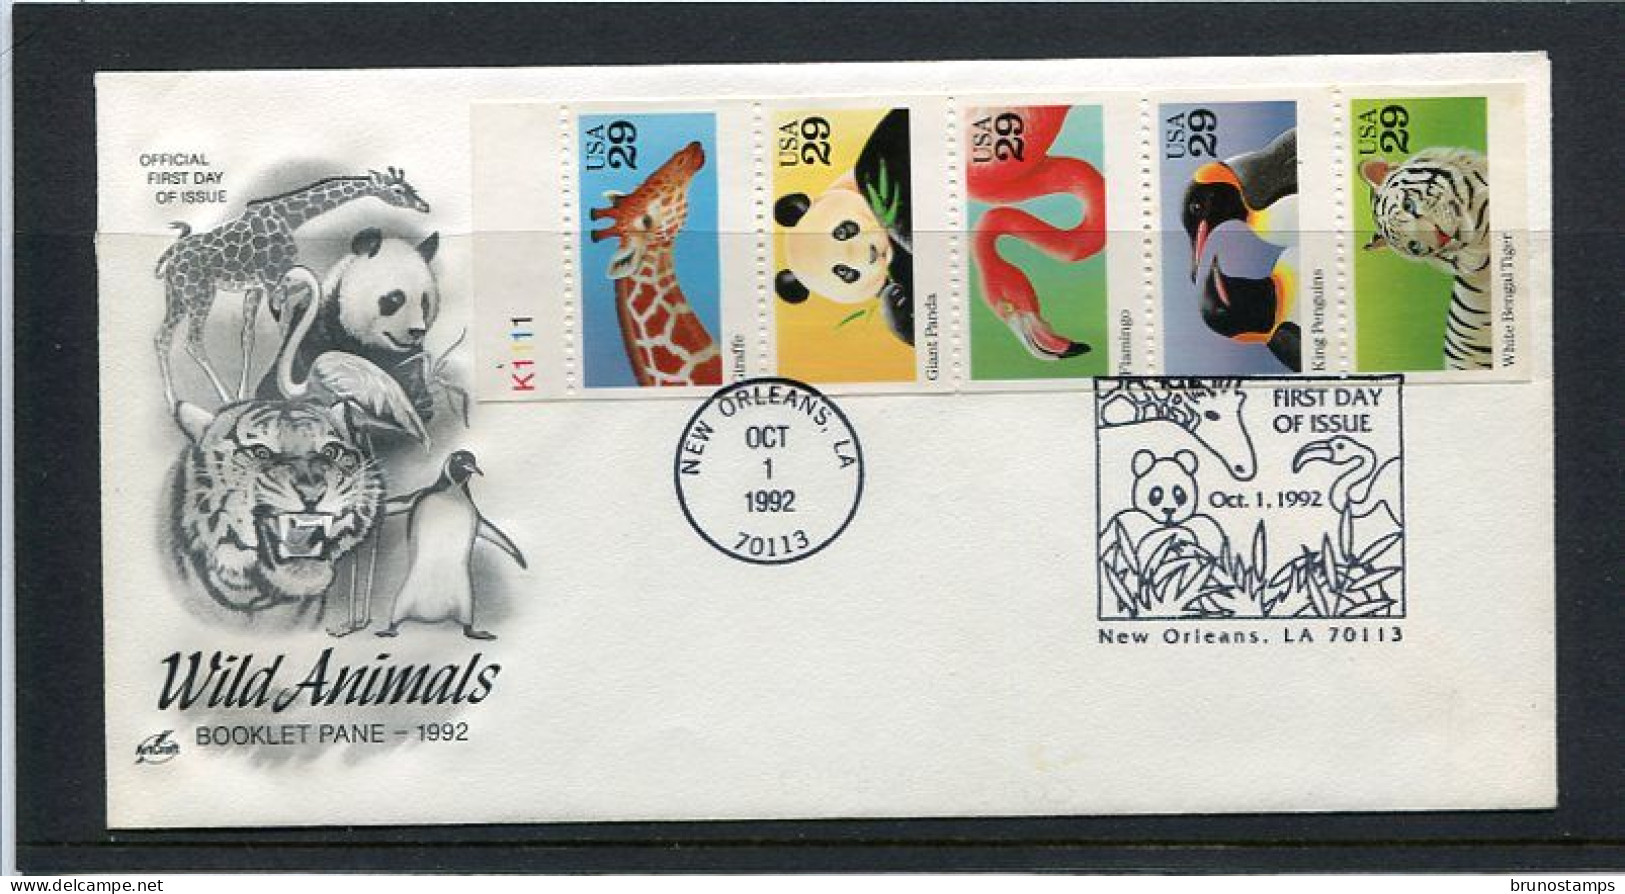 UNITED STATES/USA - 1992  WILD ANIMALS  BOOKLET PANE  FIRST DAY COVER - 1991-2000